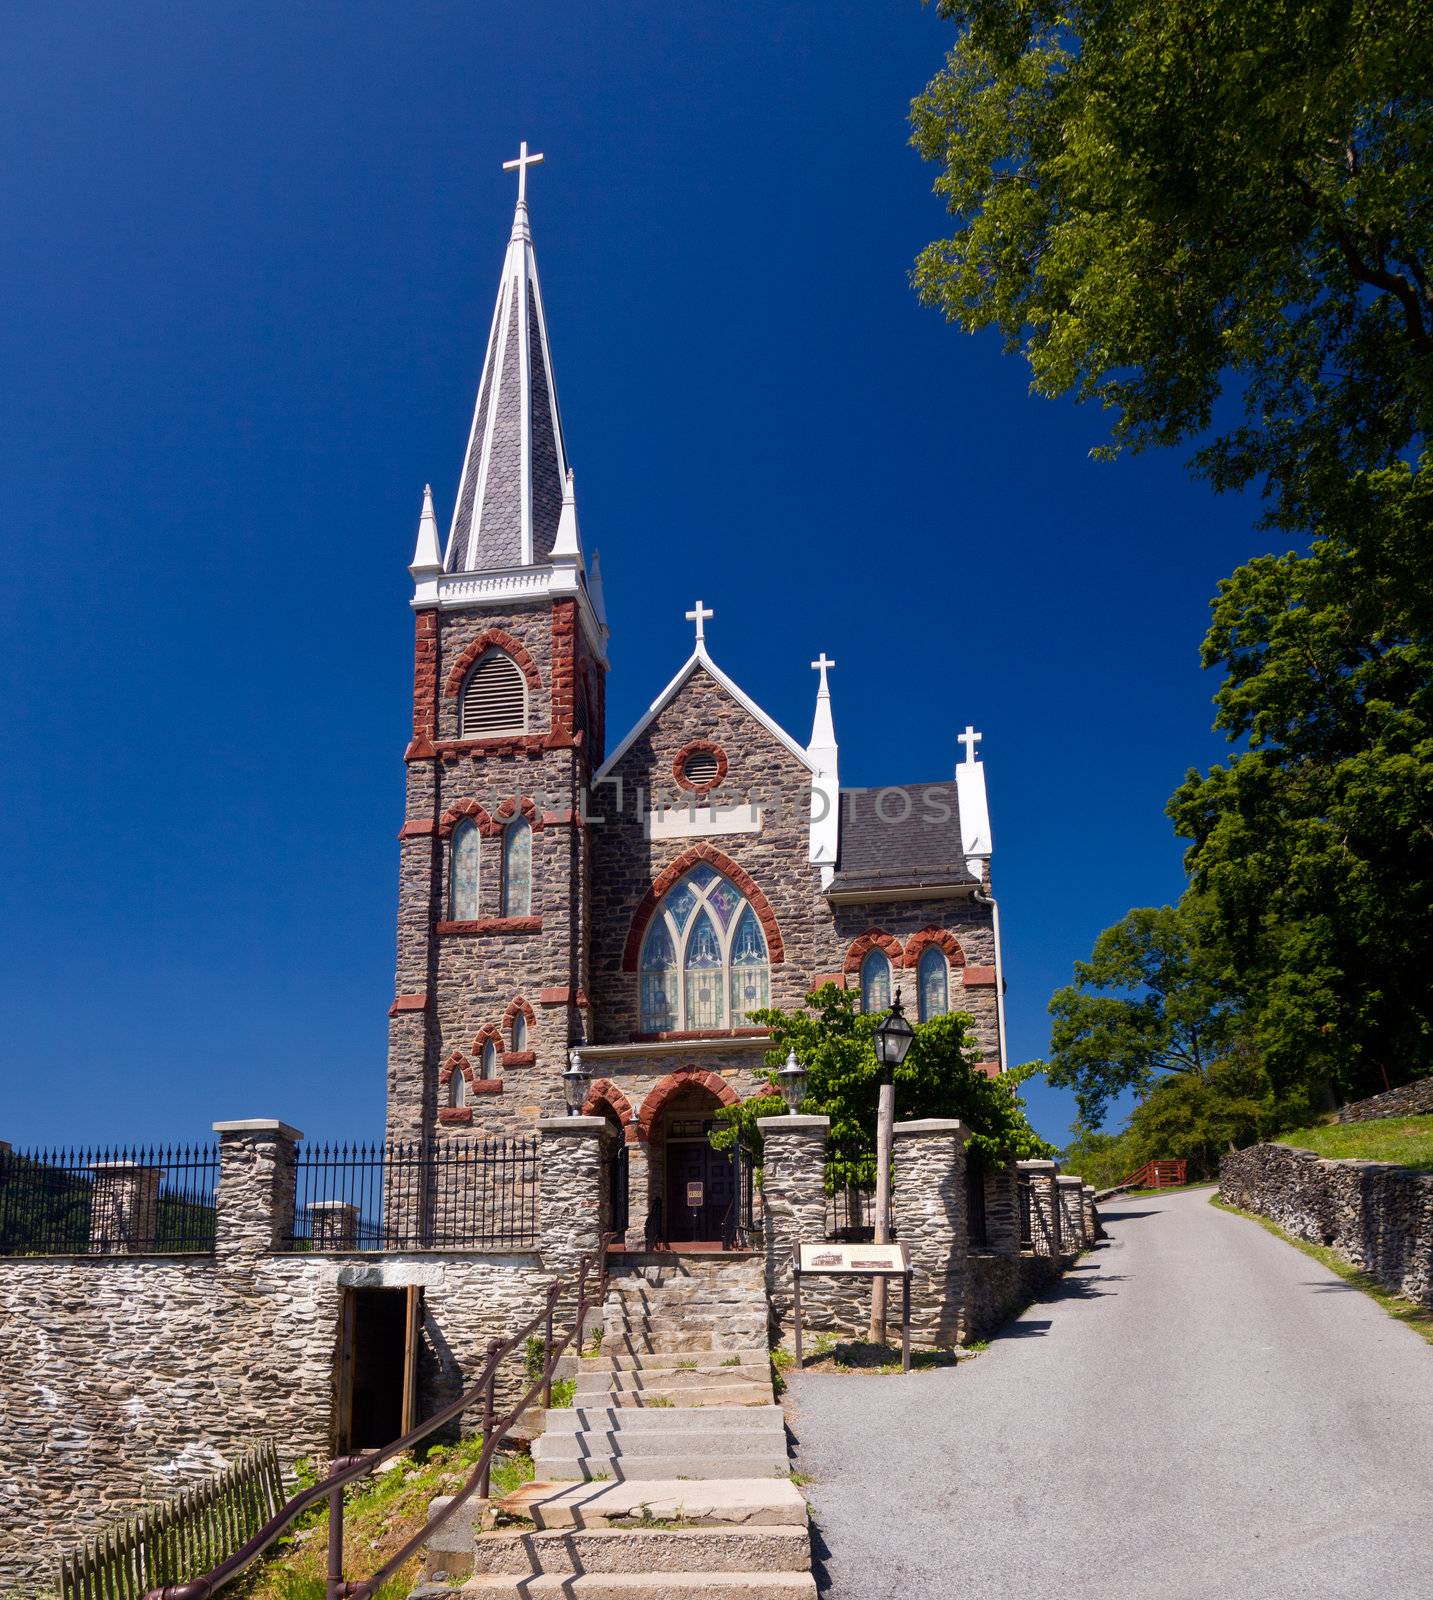 Stone church of Harpers Ferry a national park by steheap